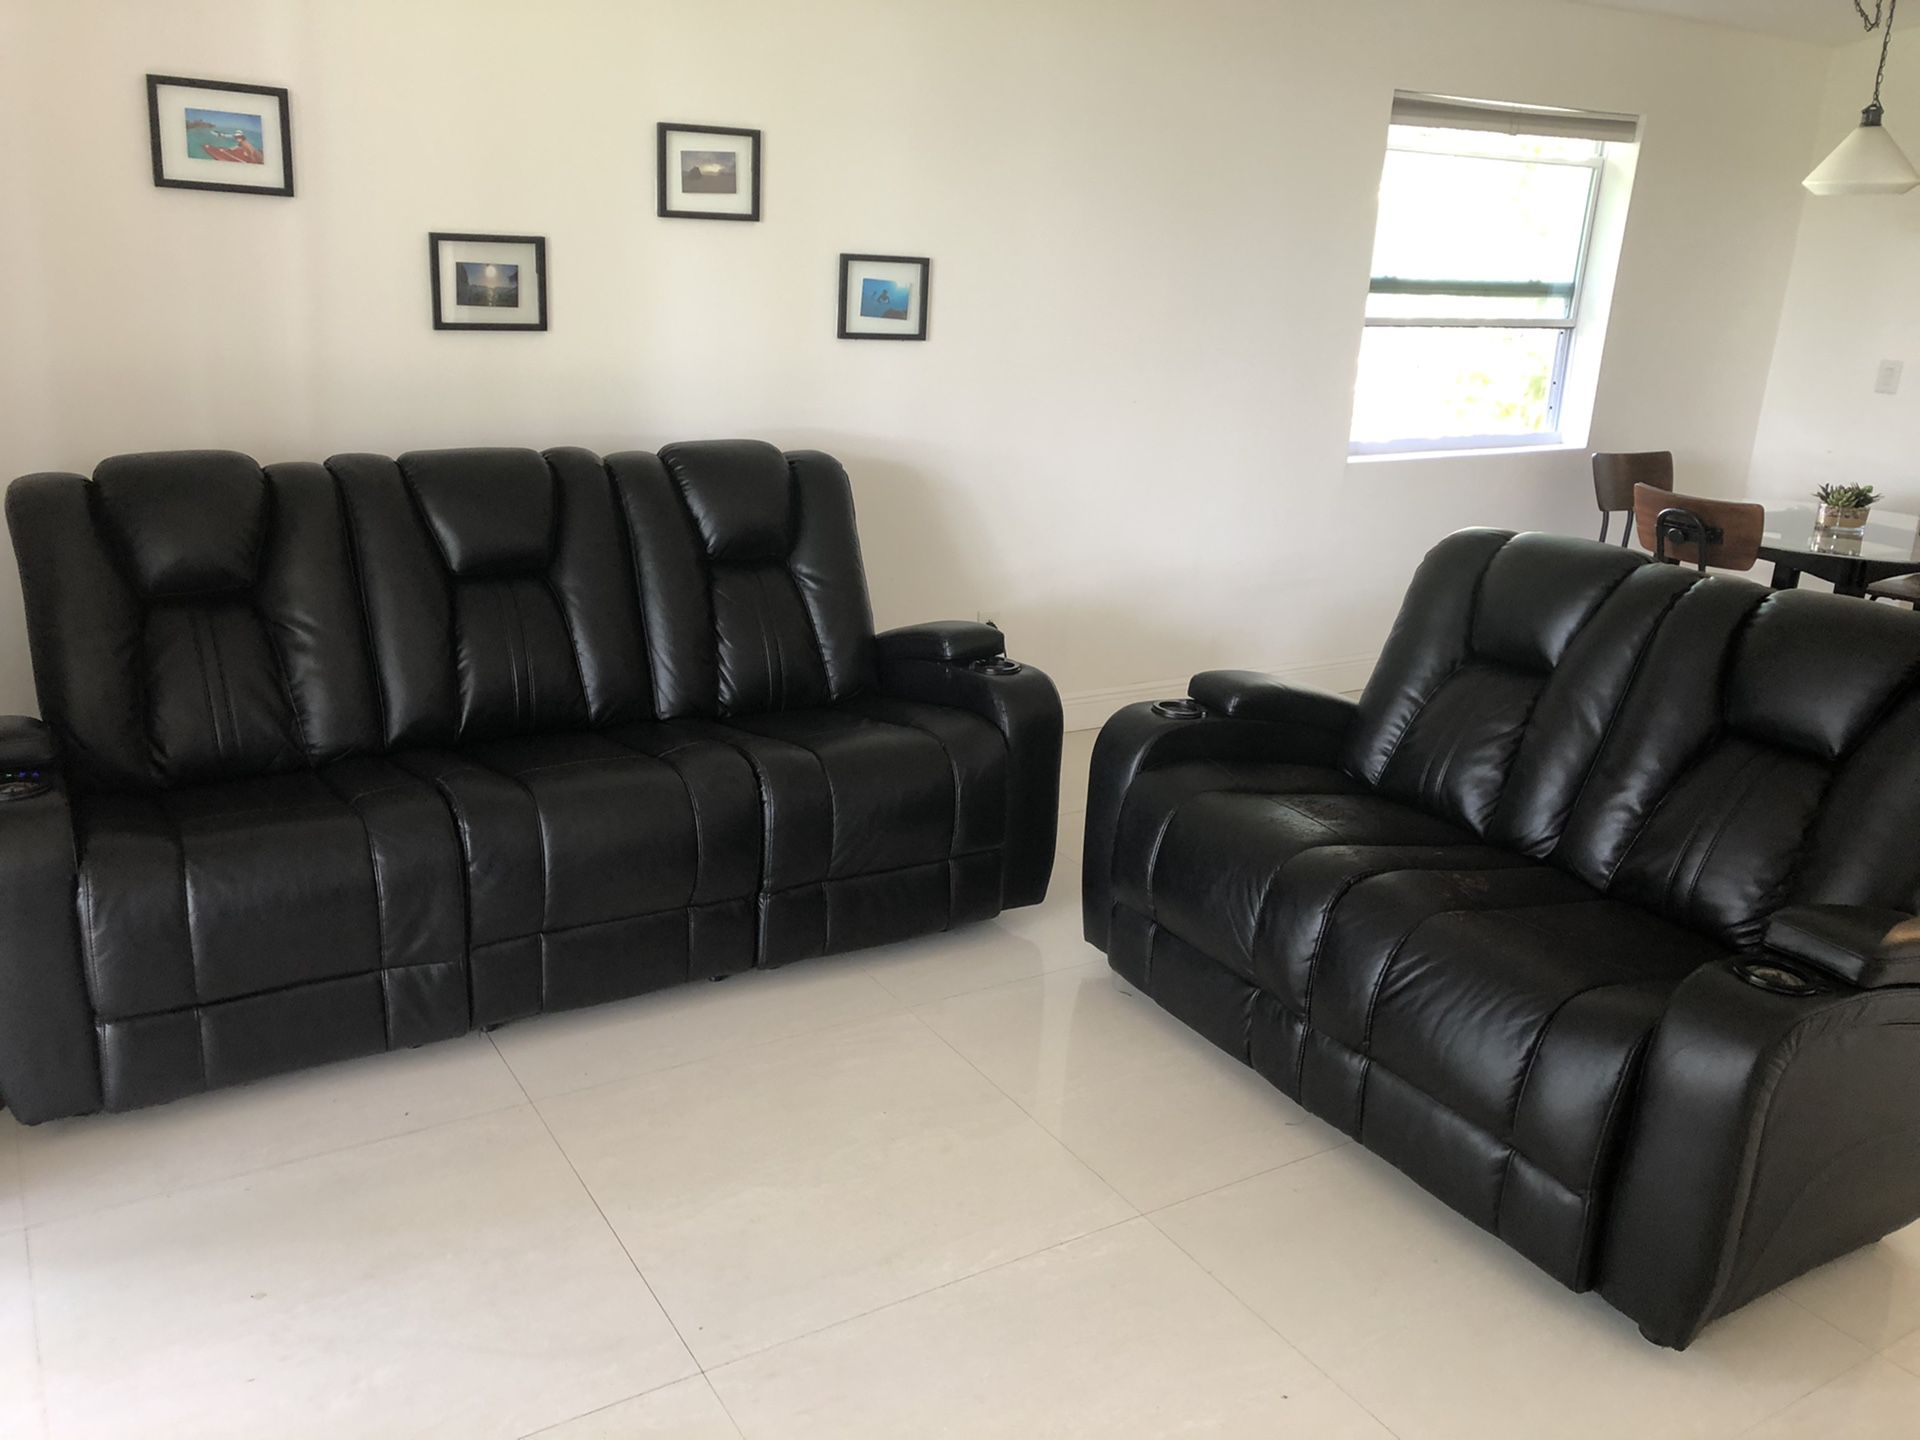 Leather couch and love seat. Recliner, electronic sofa